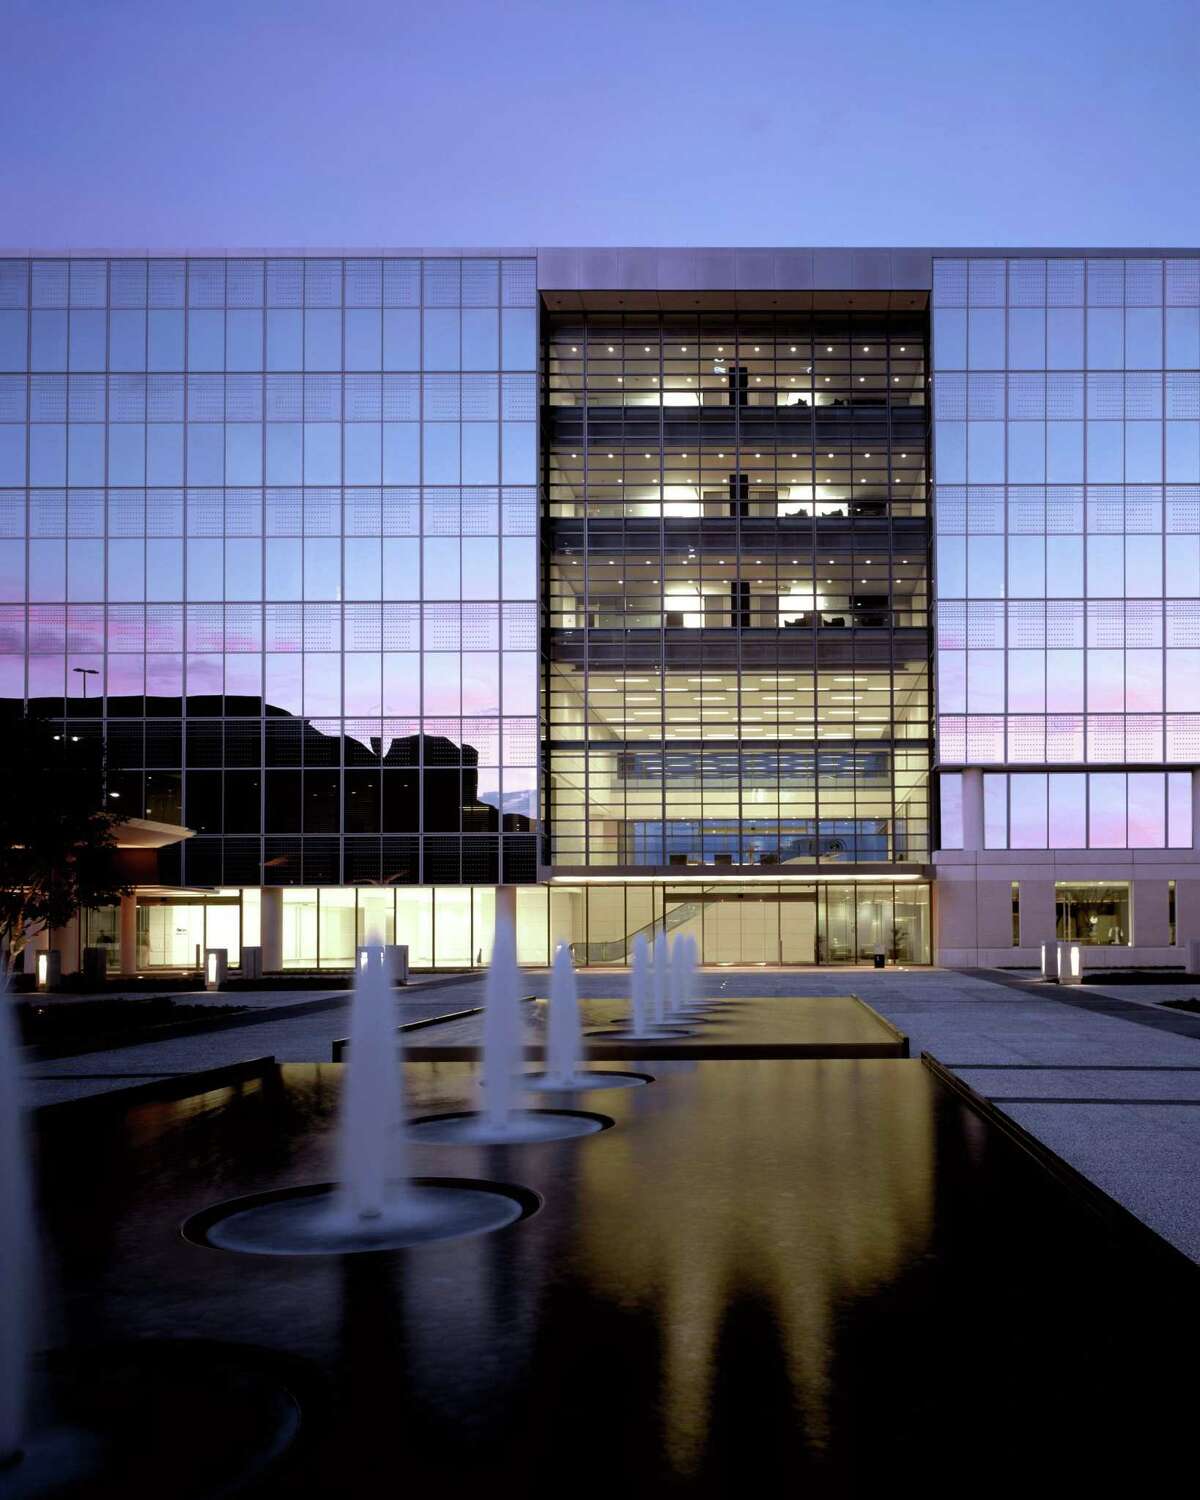 No. 4. Bechtel, a major engineering, construction and procurement firm, is relocating its Houston offices into CityWestPlace in the Westchase area of Houston. The company leased approximately 282,500 square feet across CityWestPlace Building 3 and Building 4.